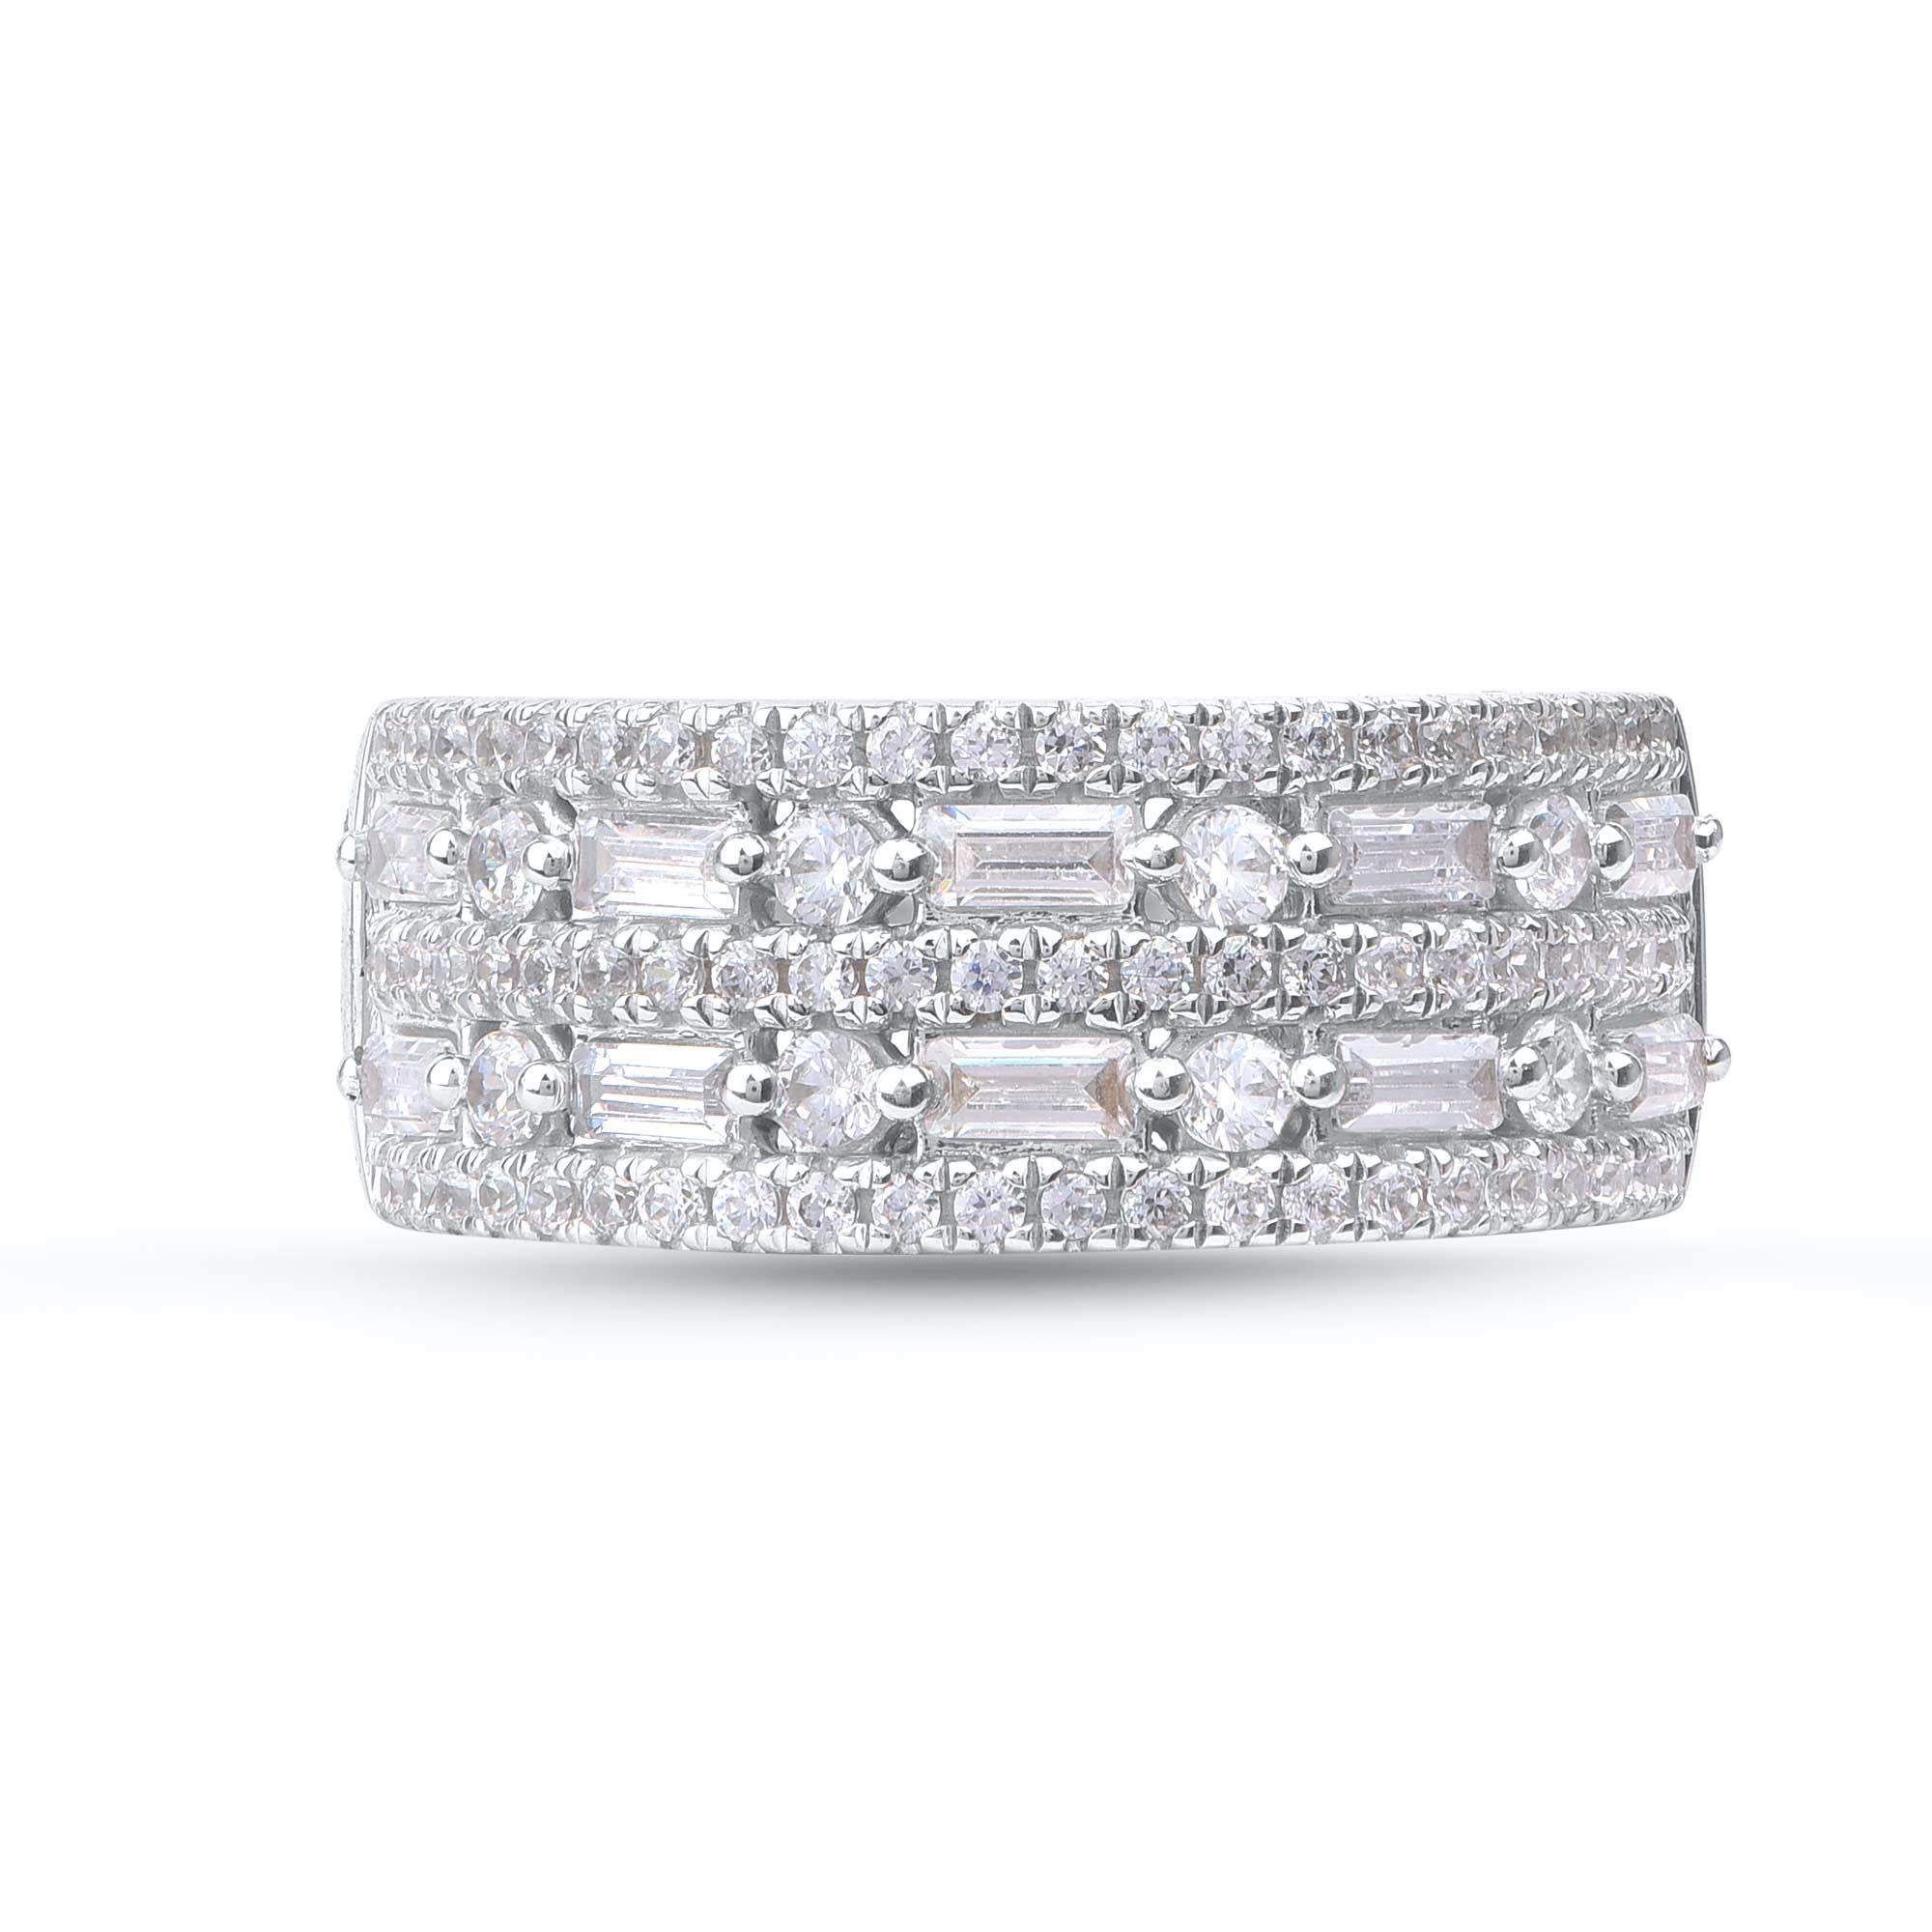 Honor your special day with this exceptional diamond band ring. This band ring features a sparkling 79 brilliant cut round diamonds and baguette cut diamonds beautifully set in prong & pave setting. The total diamond weight is 1.0 Carat. The